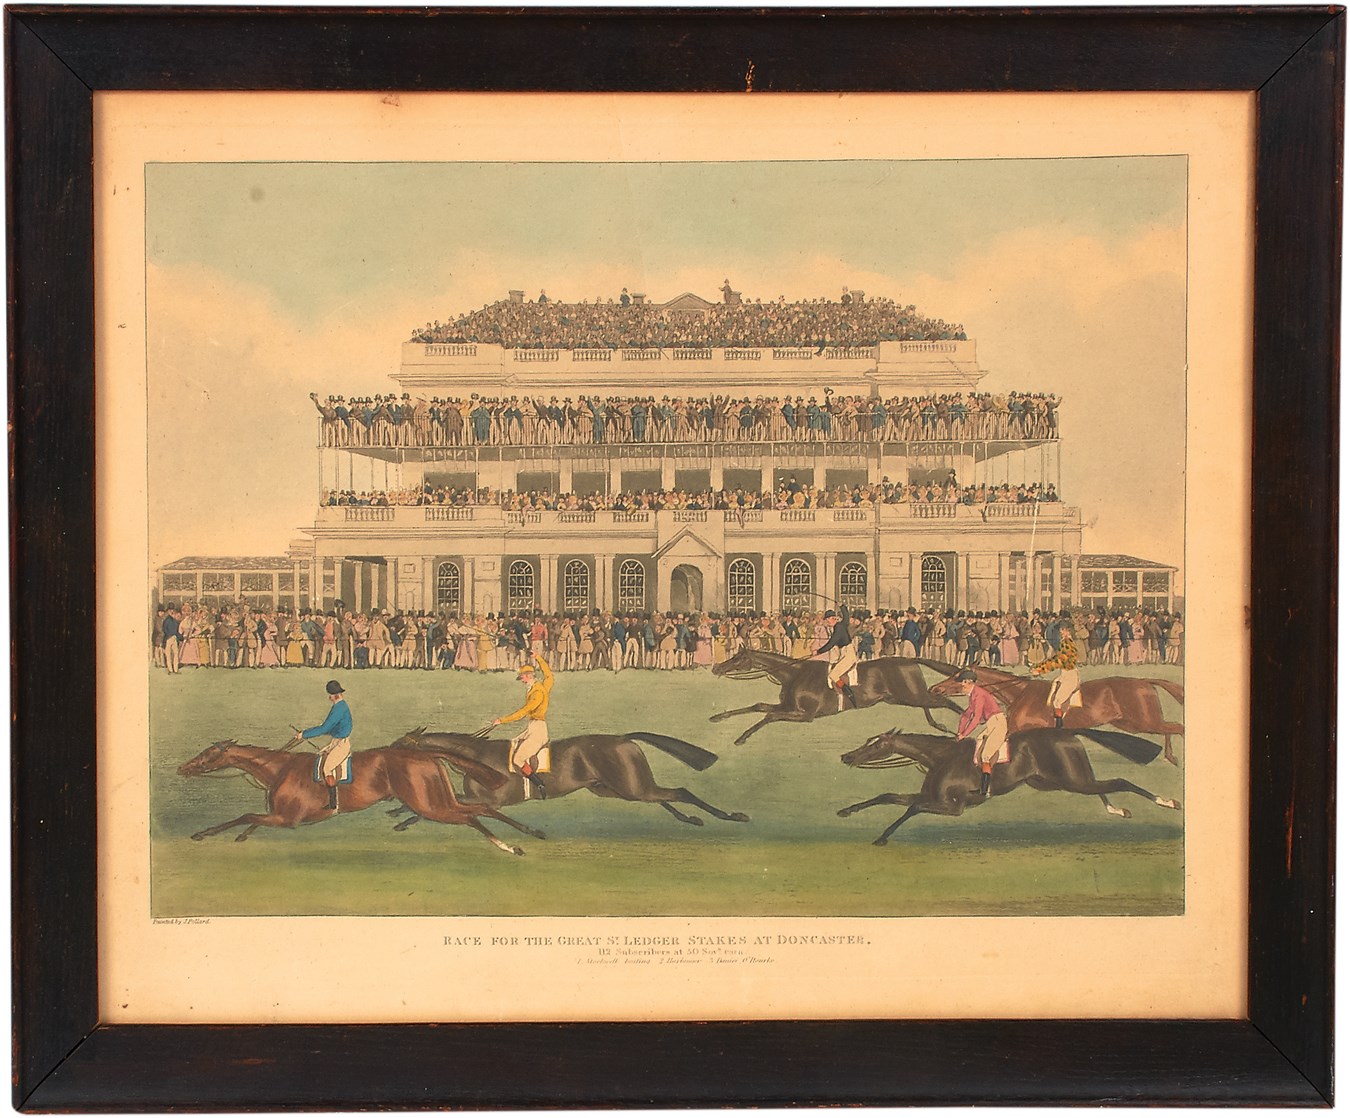 Horse Racing - Circa 1852 "Race for the Great St. Ledger Stakes at Doncaster" Watercolor Aquatint by J. Pollard